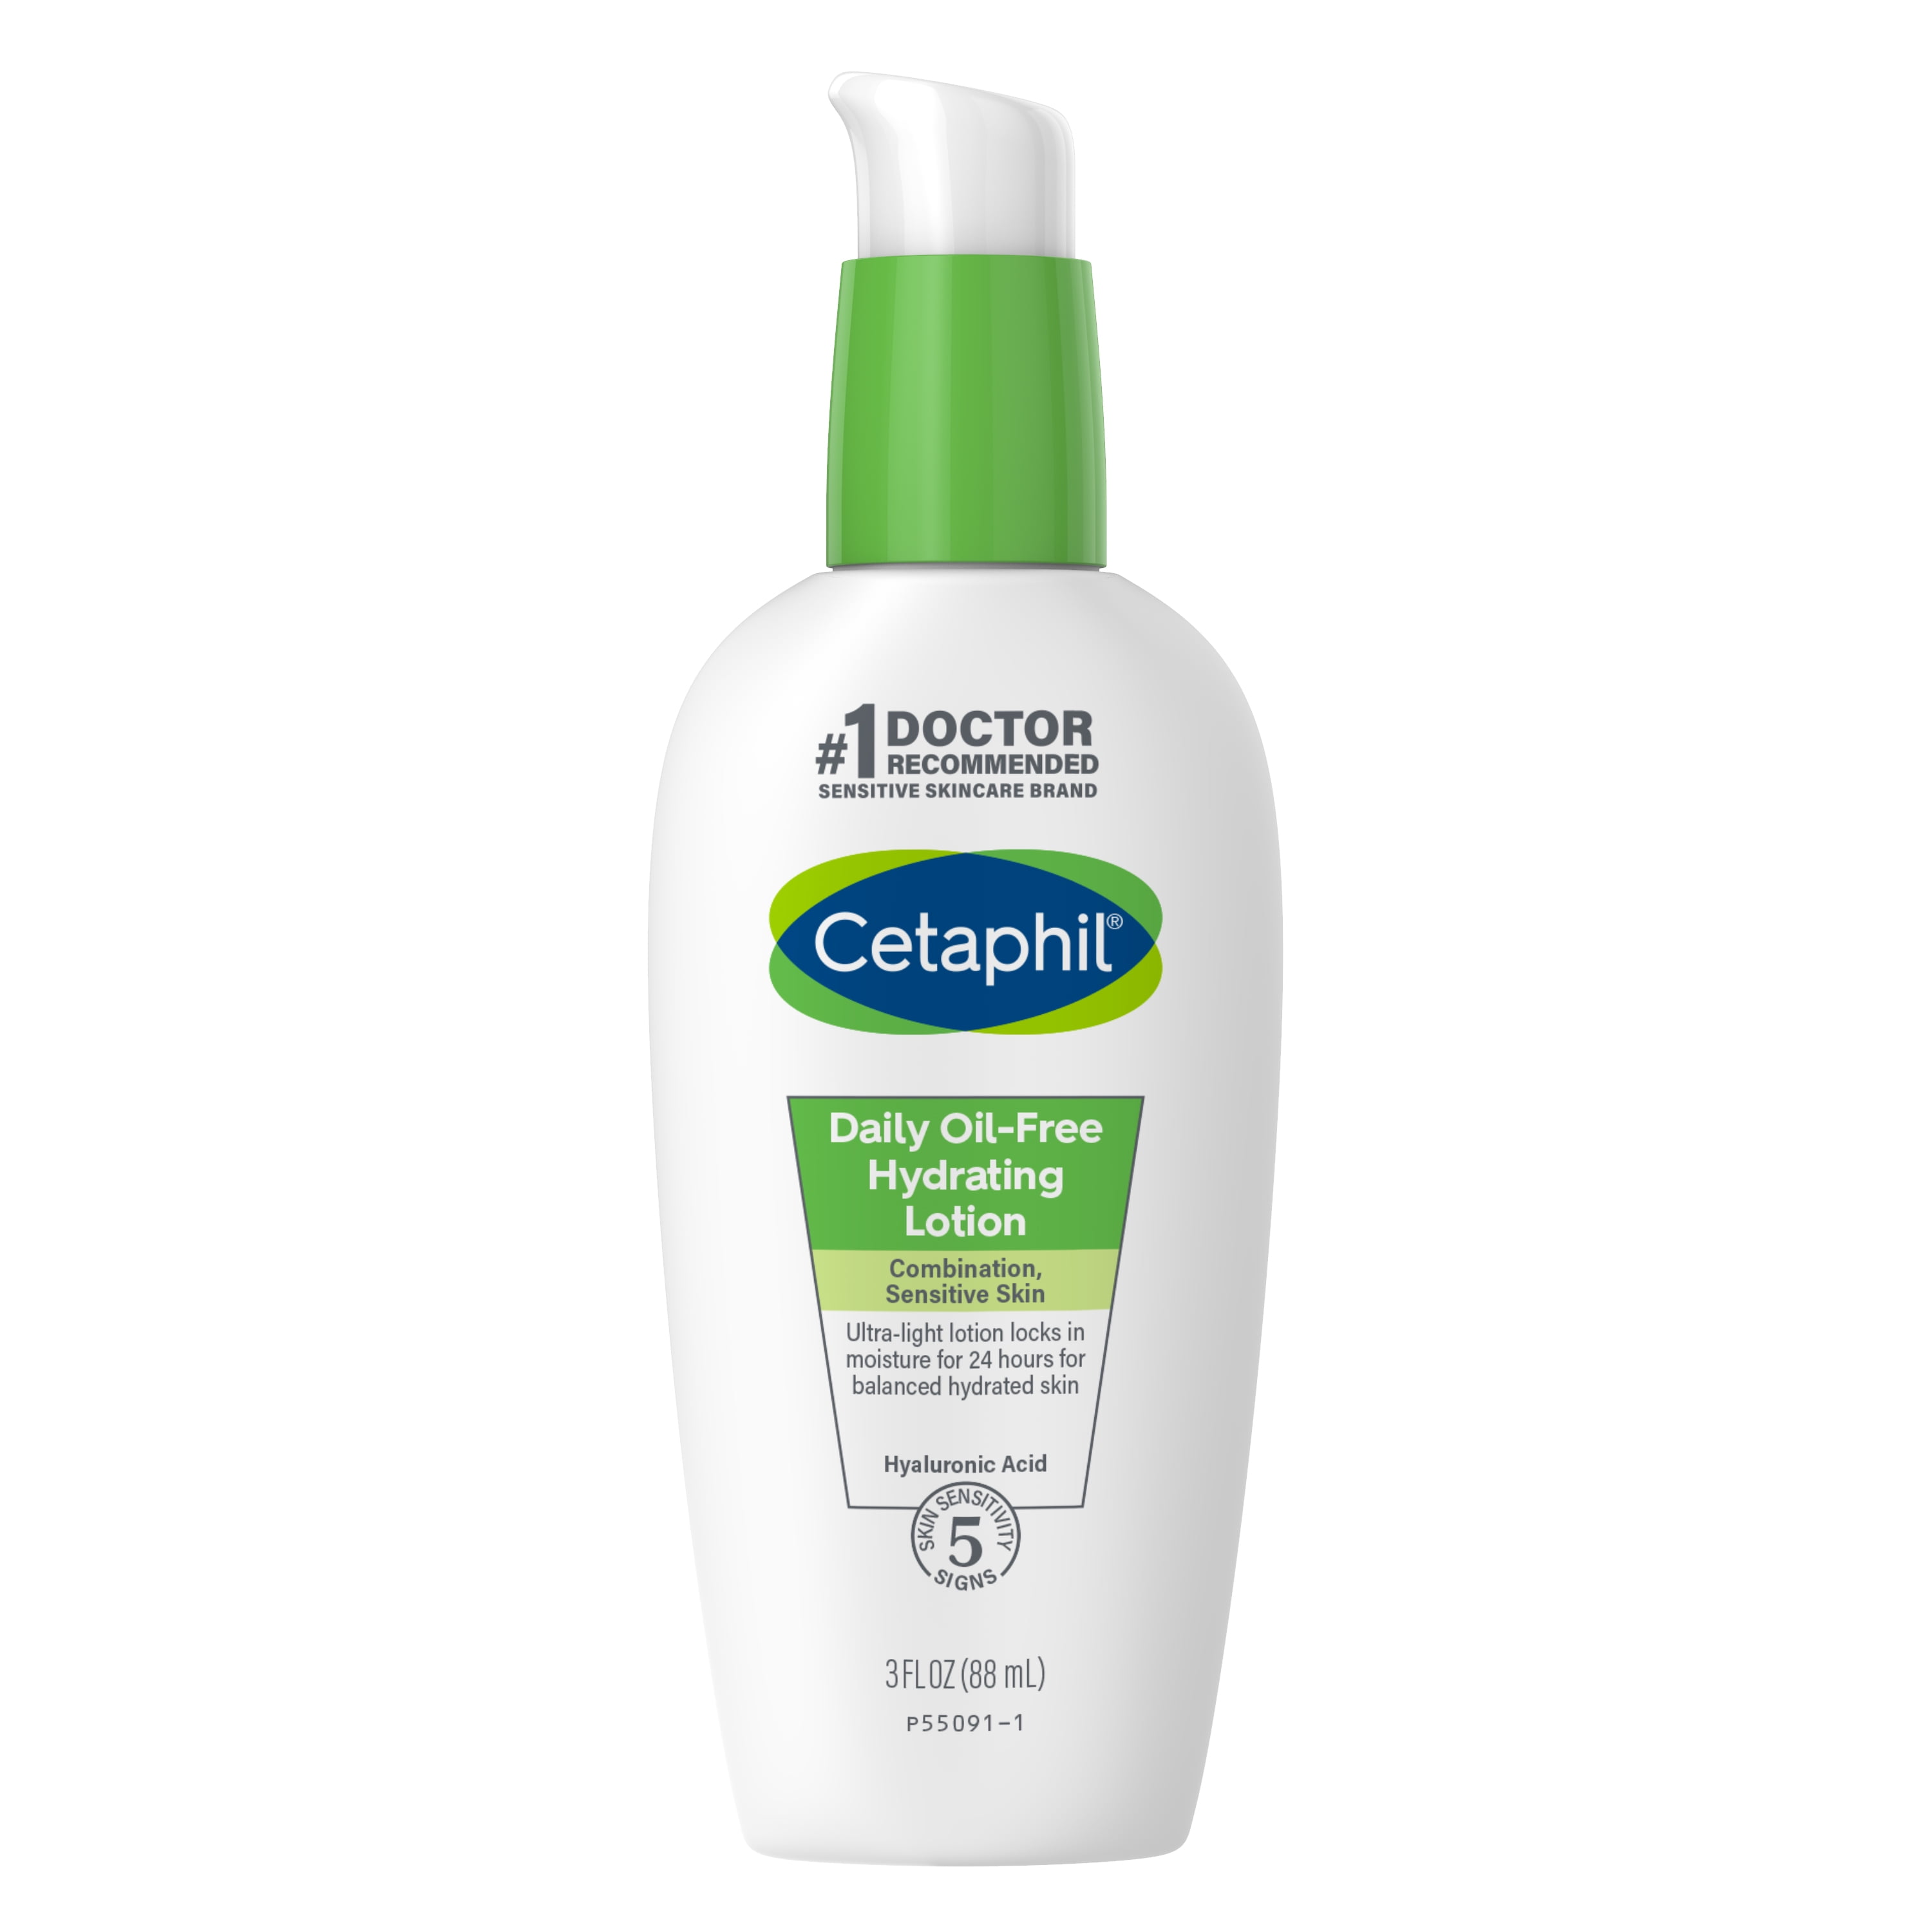 CETAPHIL Daily Oil Free Hydrating Lotion for Face | With Hyaluronic Acid | 3 fl oz | Lasting 24 Hour Hydration | Daily Lotion for Combination Skin | Fragrance Free | Non-Comedogenic